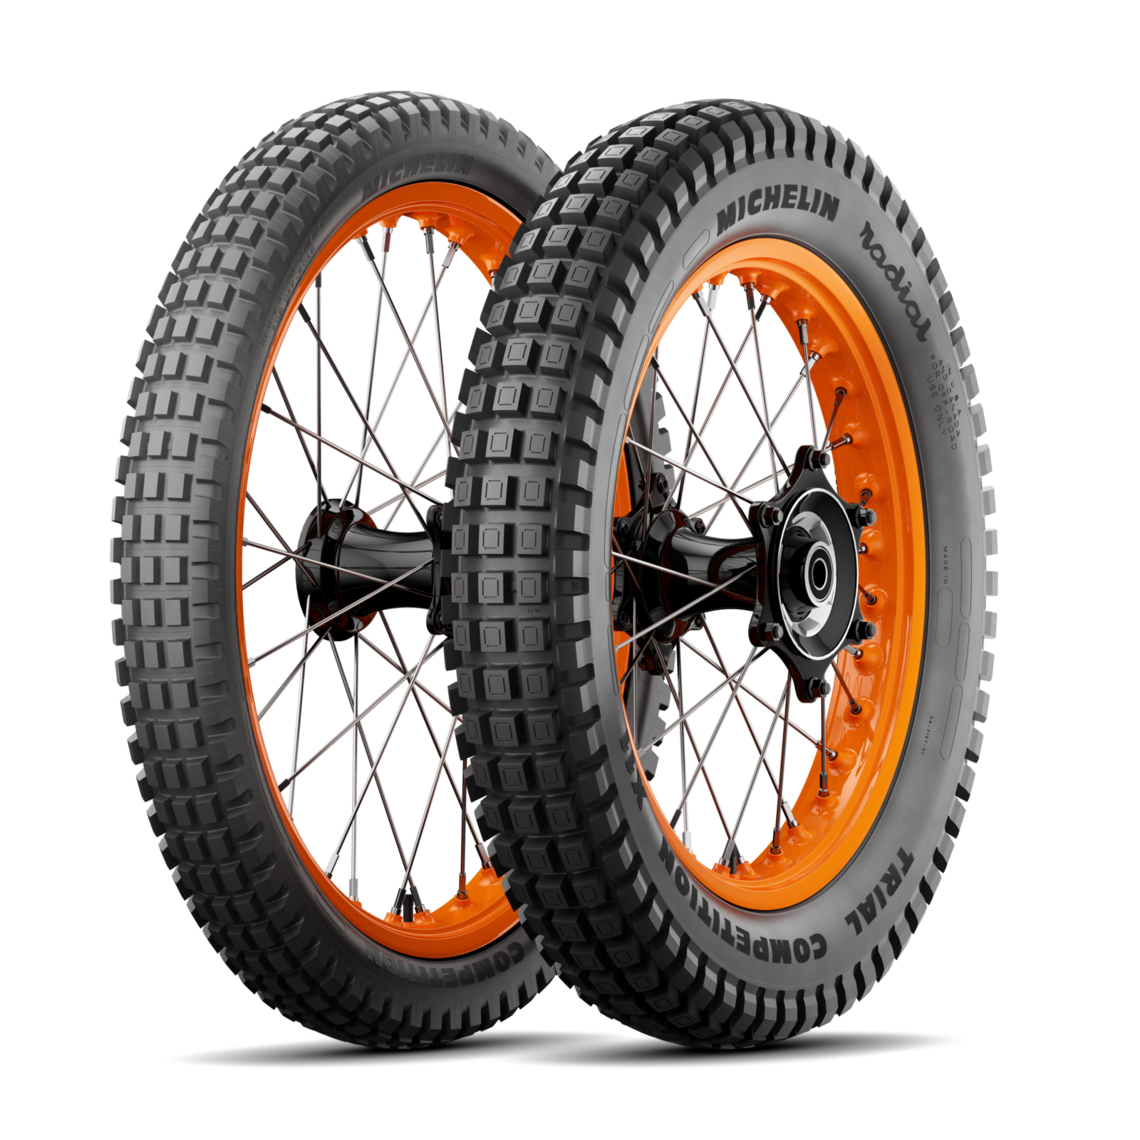 275-21 45L Competition Trails Tyre Michelin Trial Comp Tubed Front Tyre 2.75